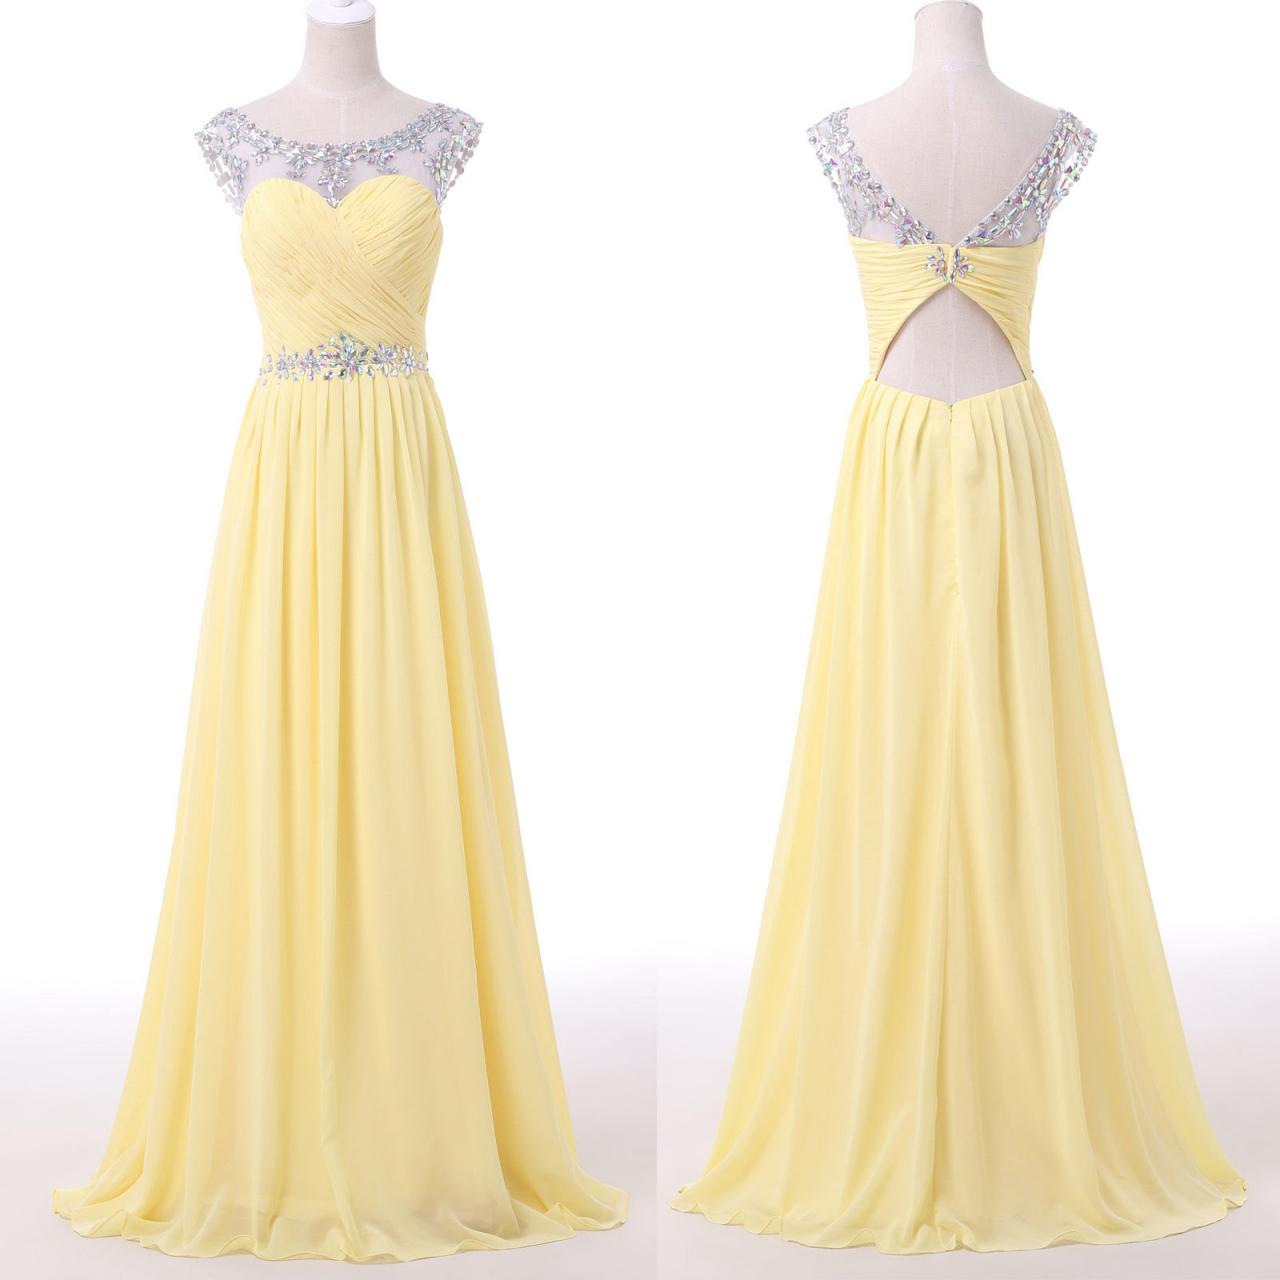 Yellow Beaded Illusion Chiffon Prom Dress With Cut Out Back, Charming Beading Long Woman Evening Dress